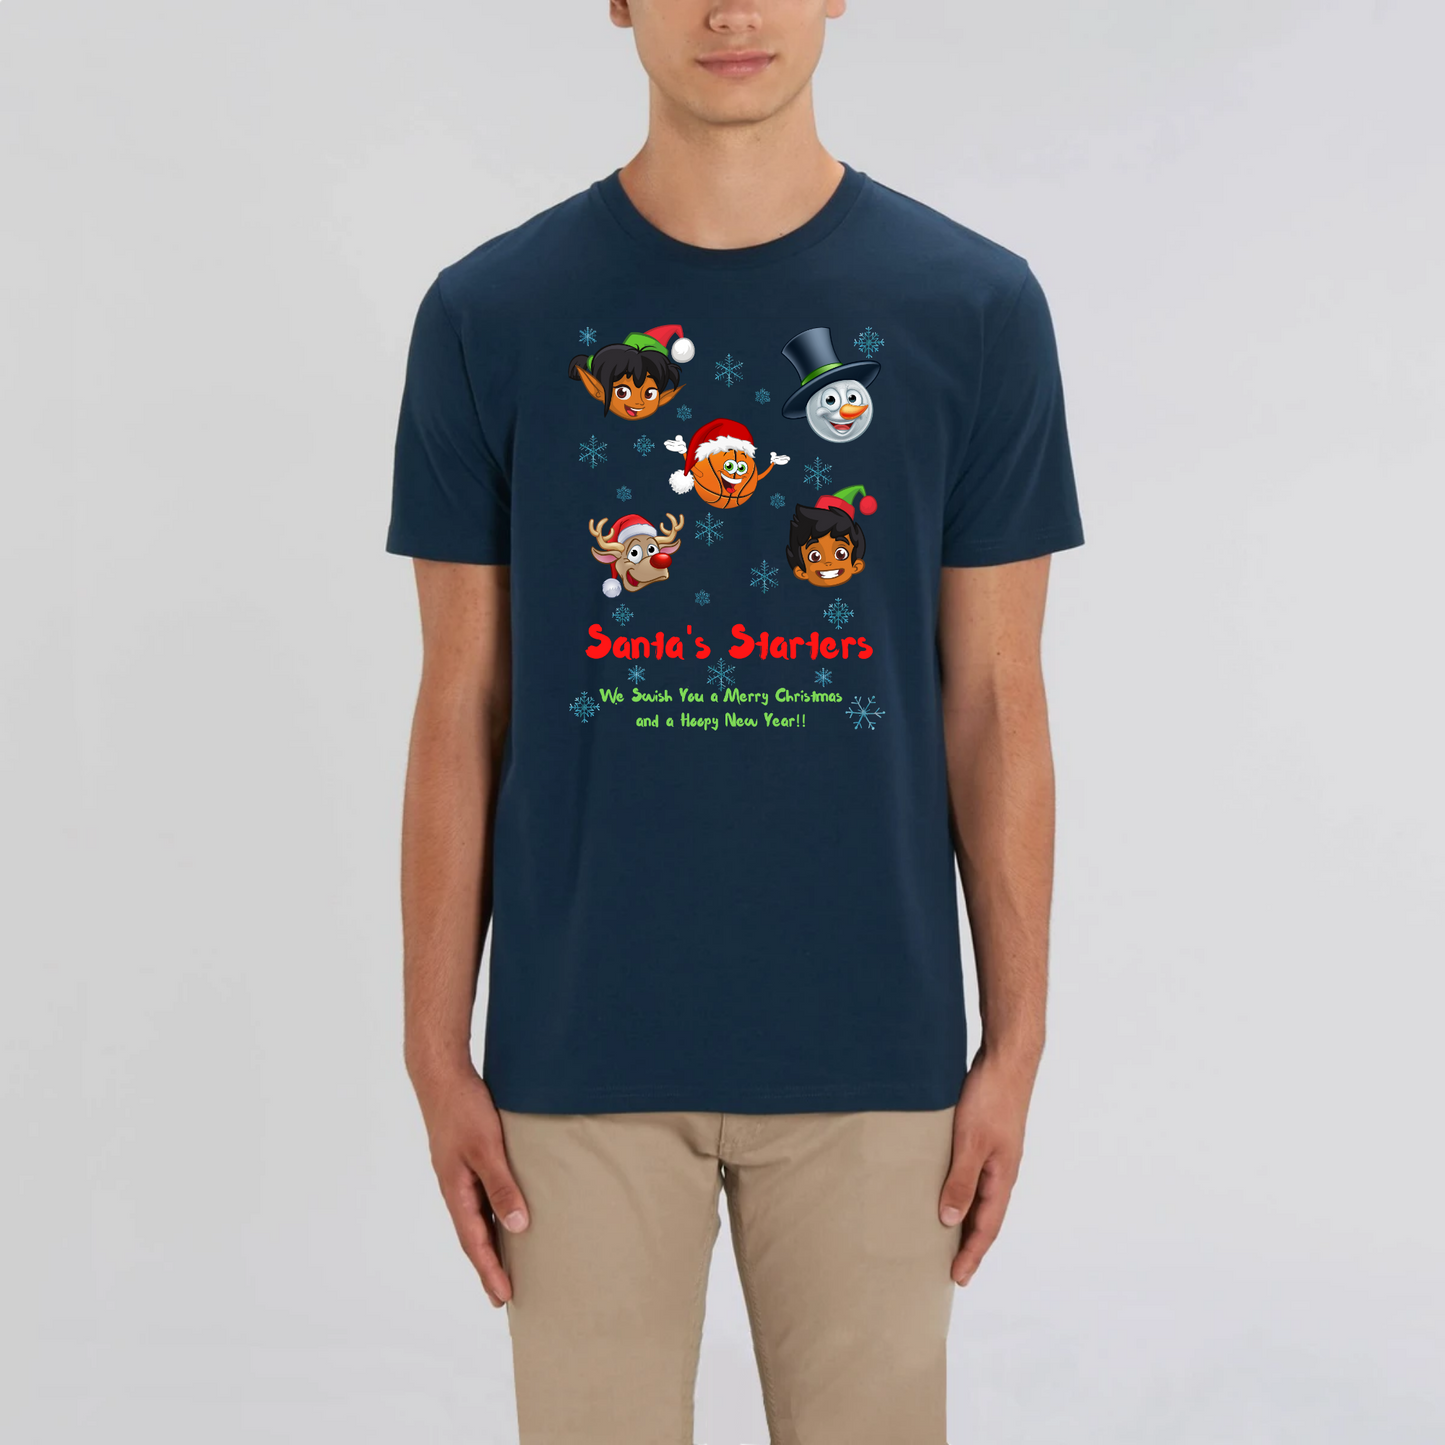 Model wearing a basketball themed Christmas t-shirt with a print design, The design features 5 cartoon character heads of 2 elves, a snowman, Rudolf and a basketball head with the heading Santa's Starters and sub heading We swish you a Merry Christmas and a Hoopy New Year. The t-shirt is Navy